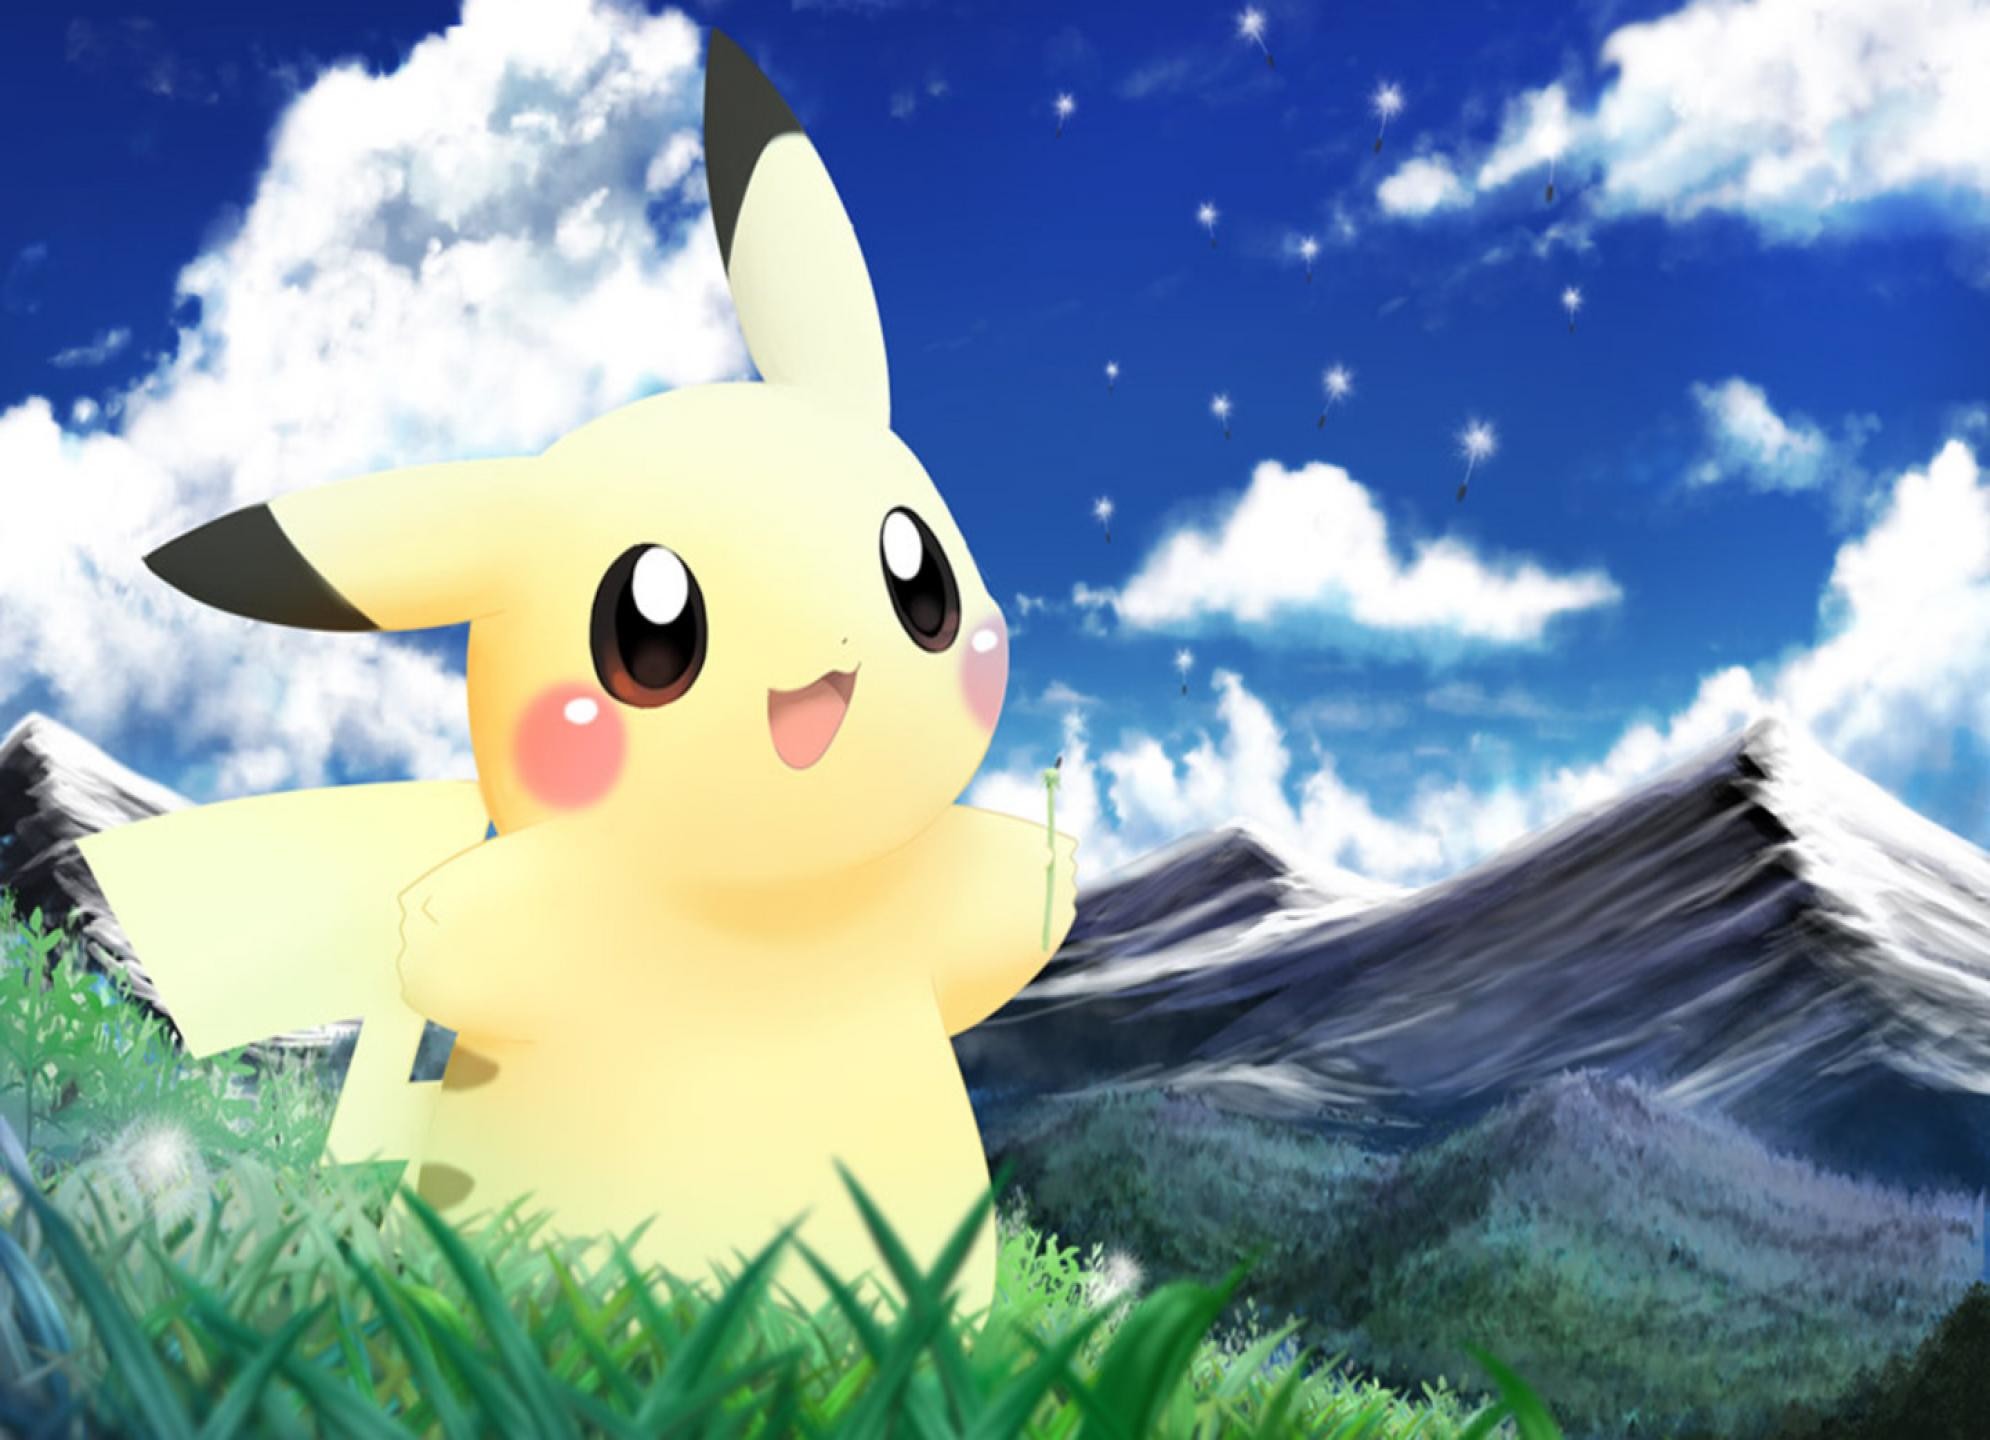 1990x1440 Cute Pikachu Wallpaper | cute-pikachu-wallpaper-5119-hd-wallpapers.